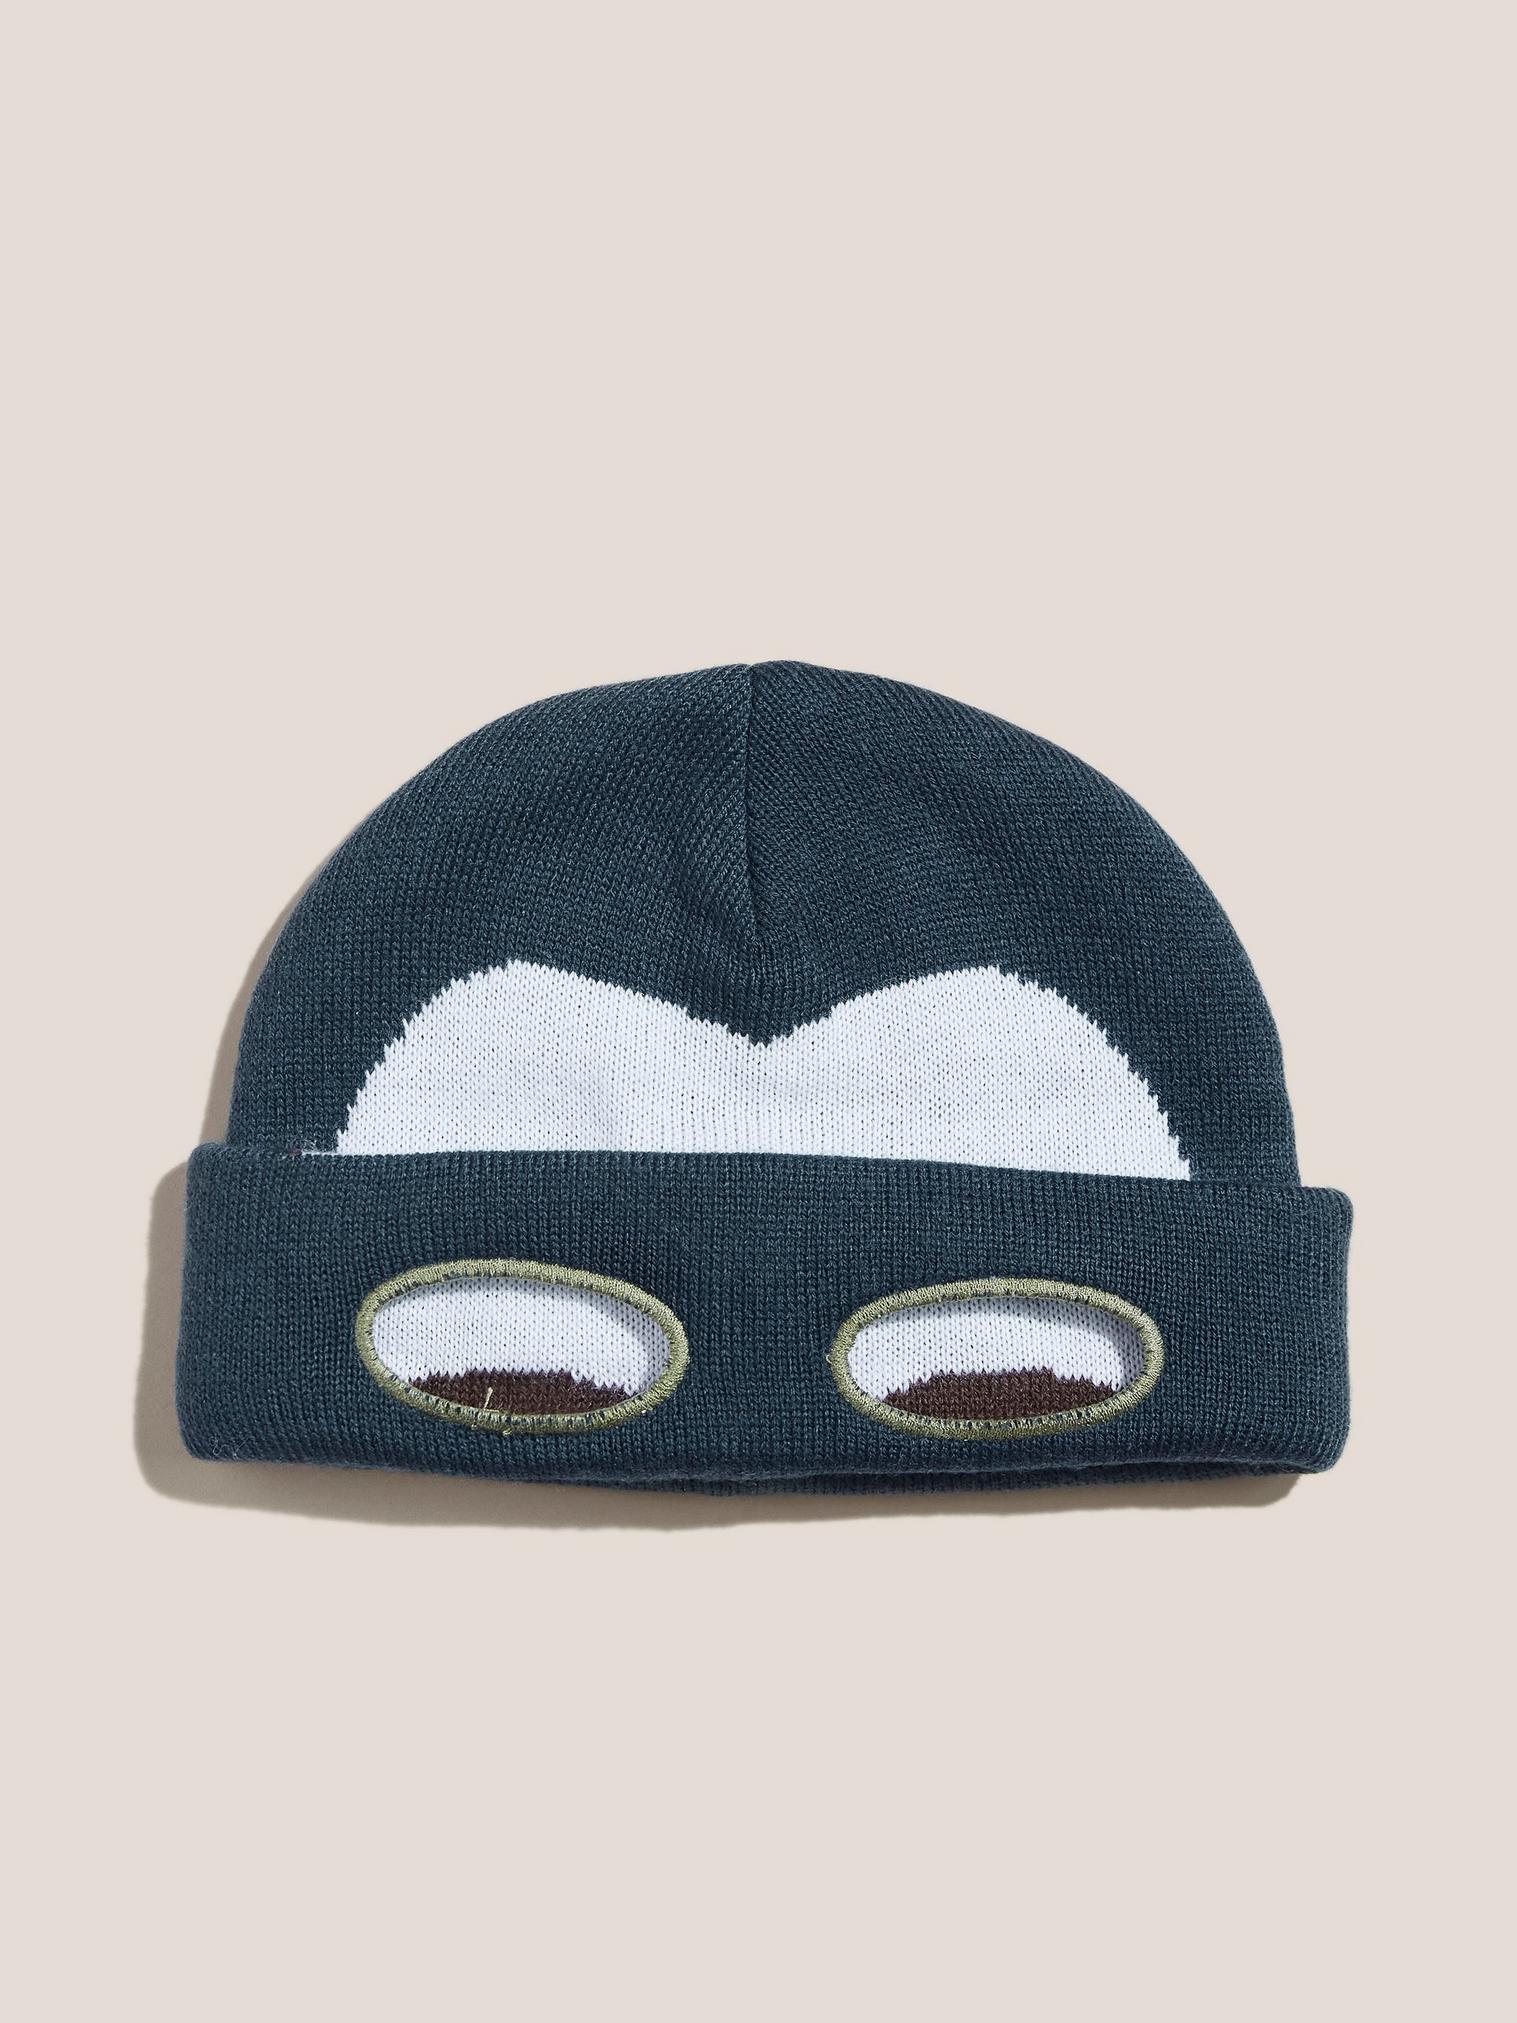 Boys Sloth Hat in TEAL MLT - FLAT FRONT